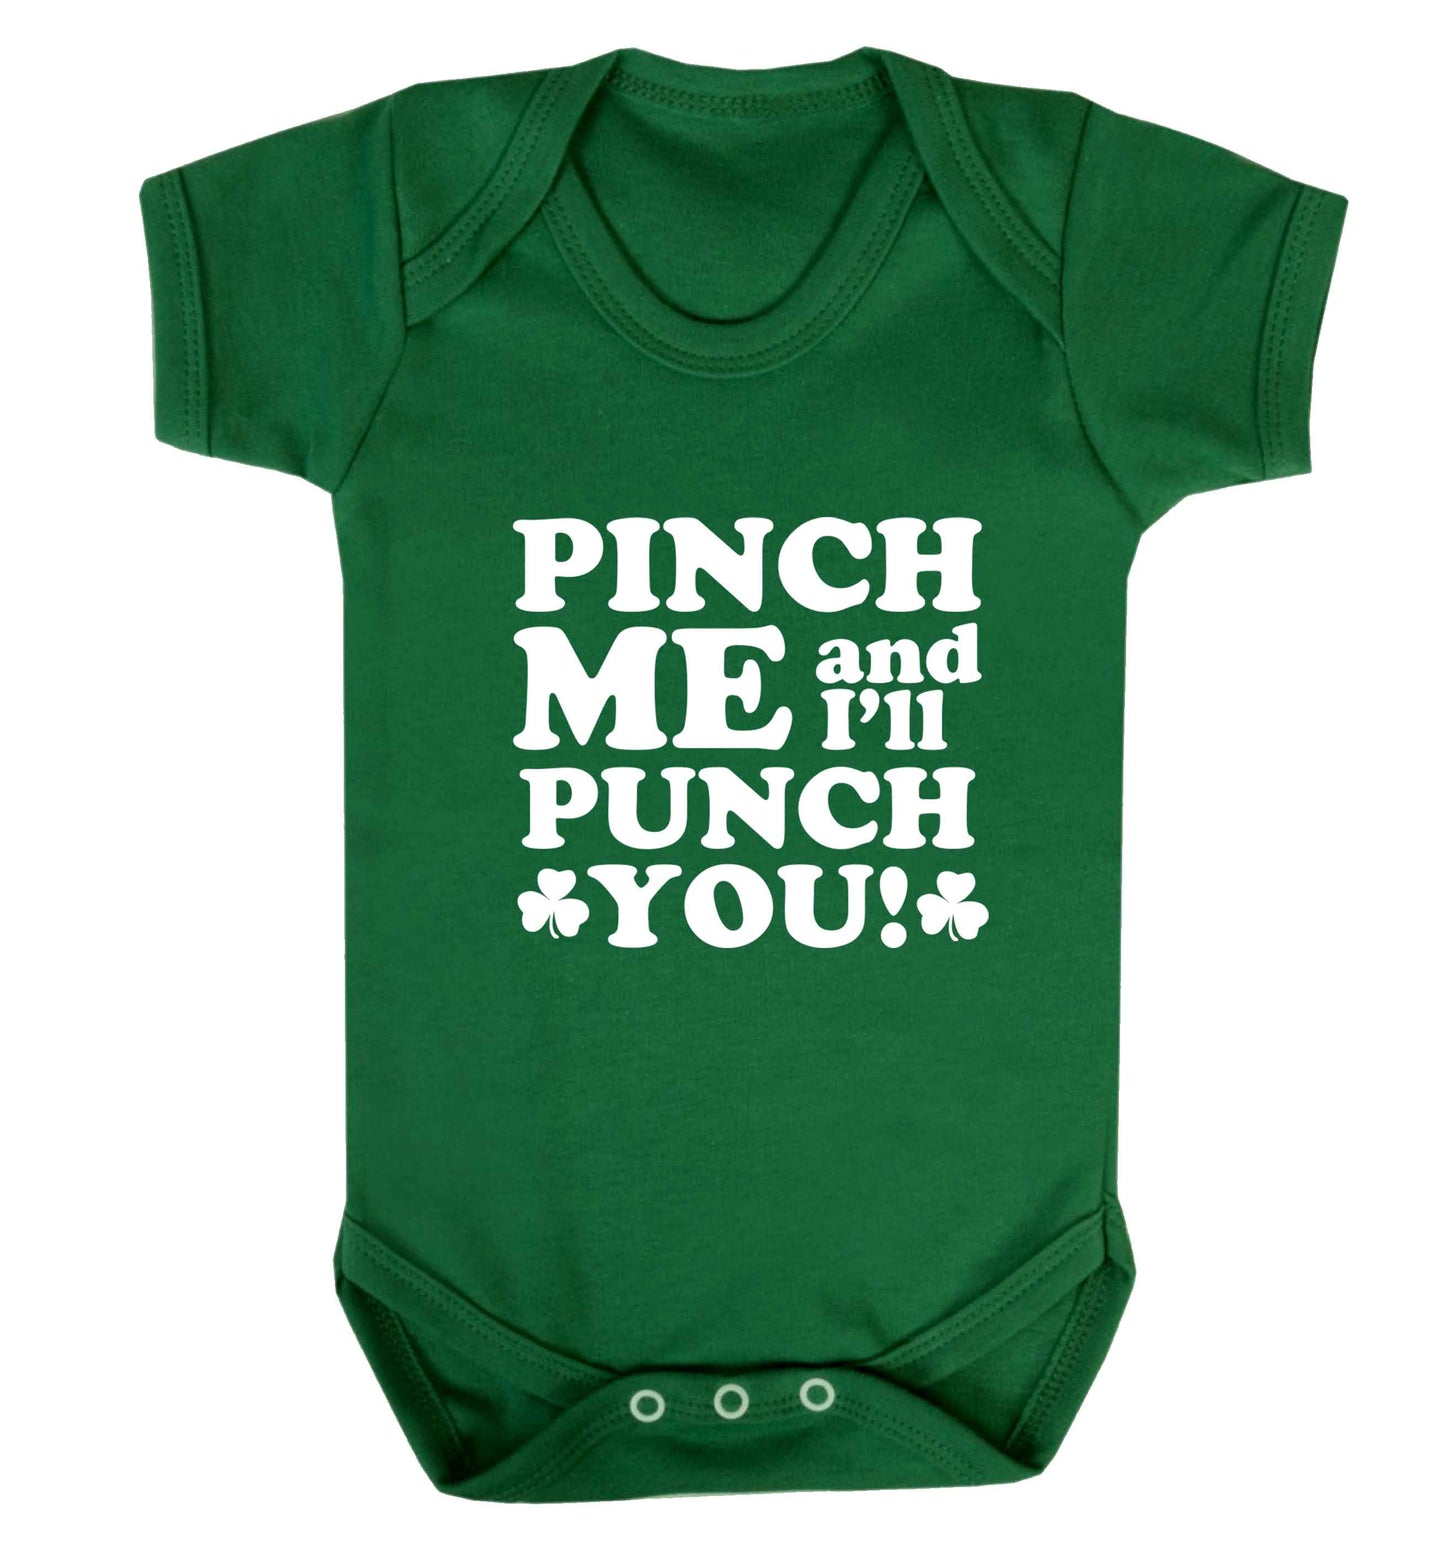 Pinch me and I'll punch you baby vest green 18-24 months